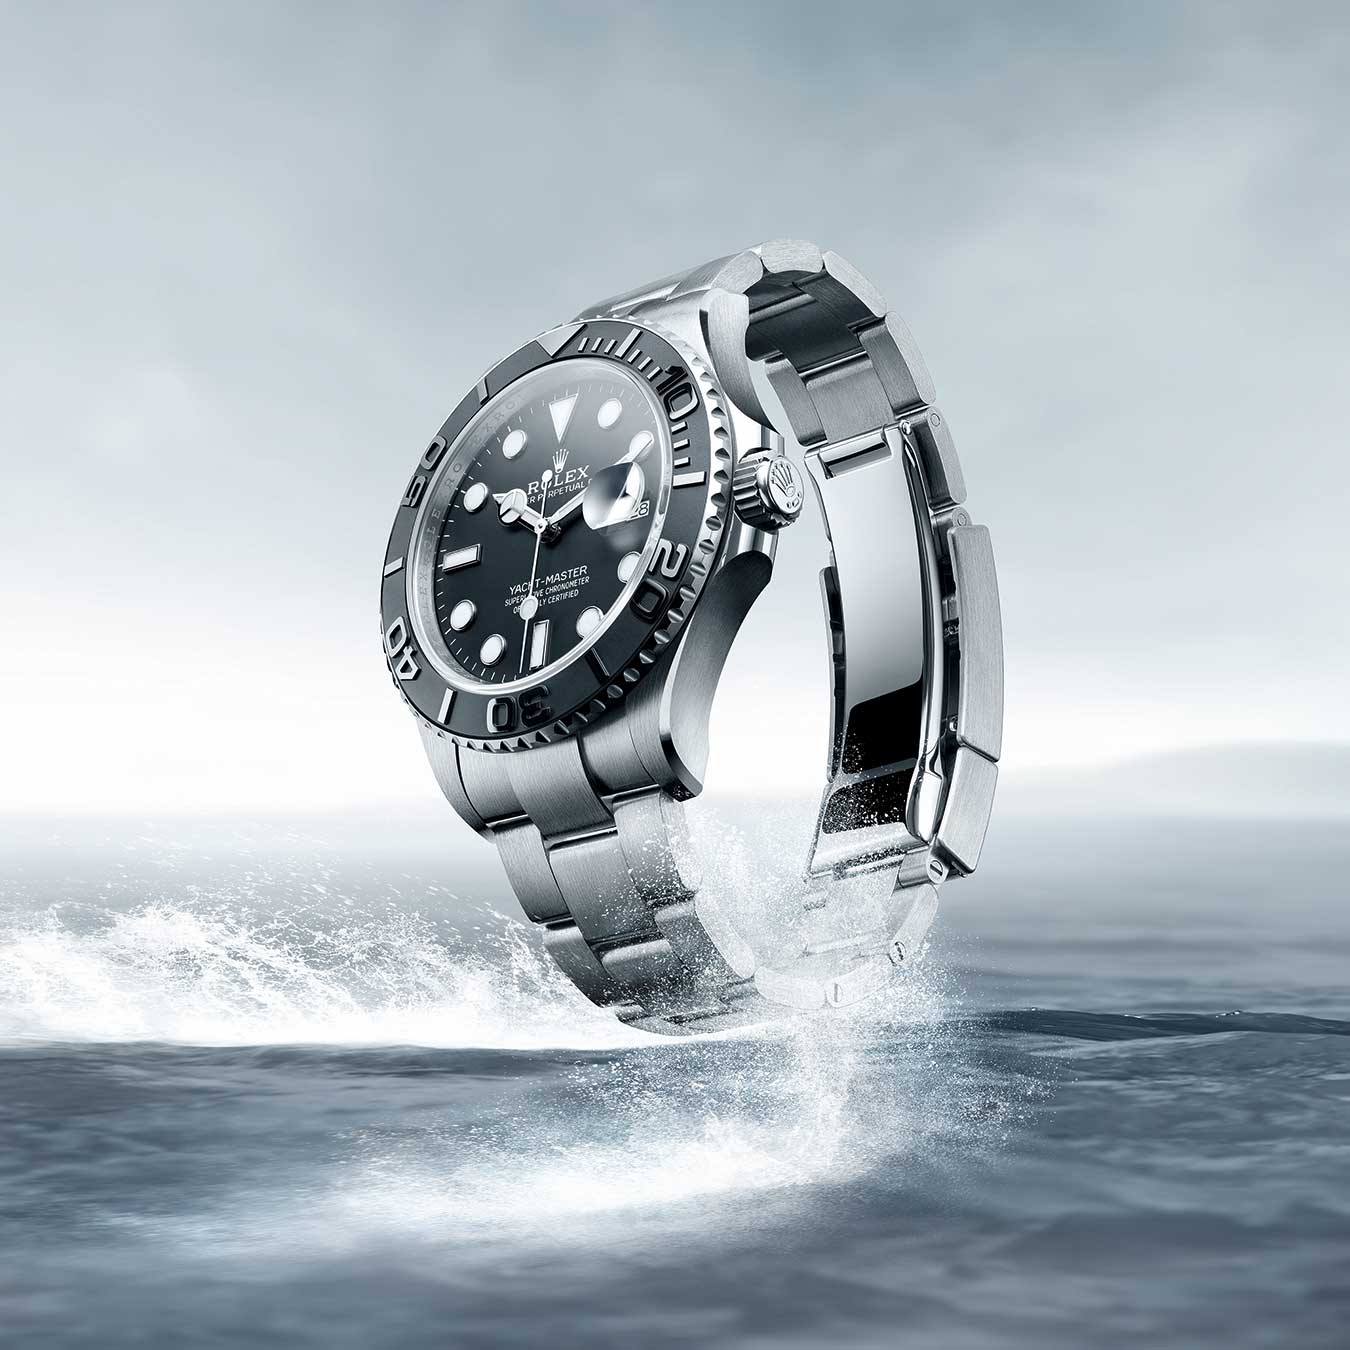 Light and Robust Rolex Yacht-Master 42 in RLX titanium on Water